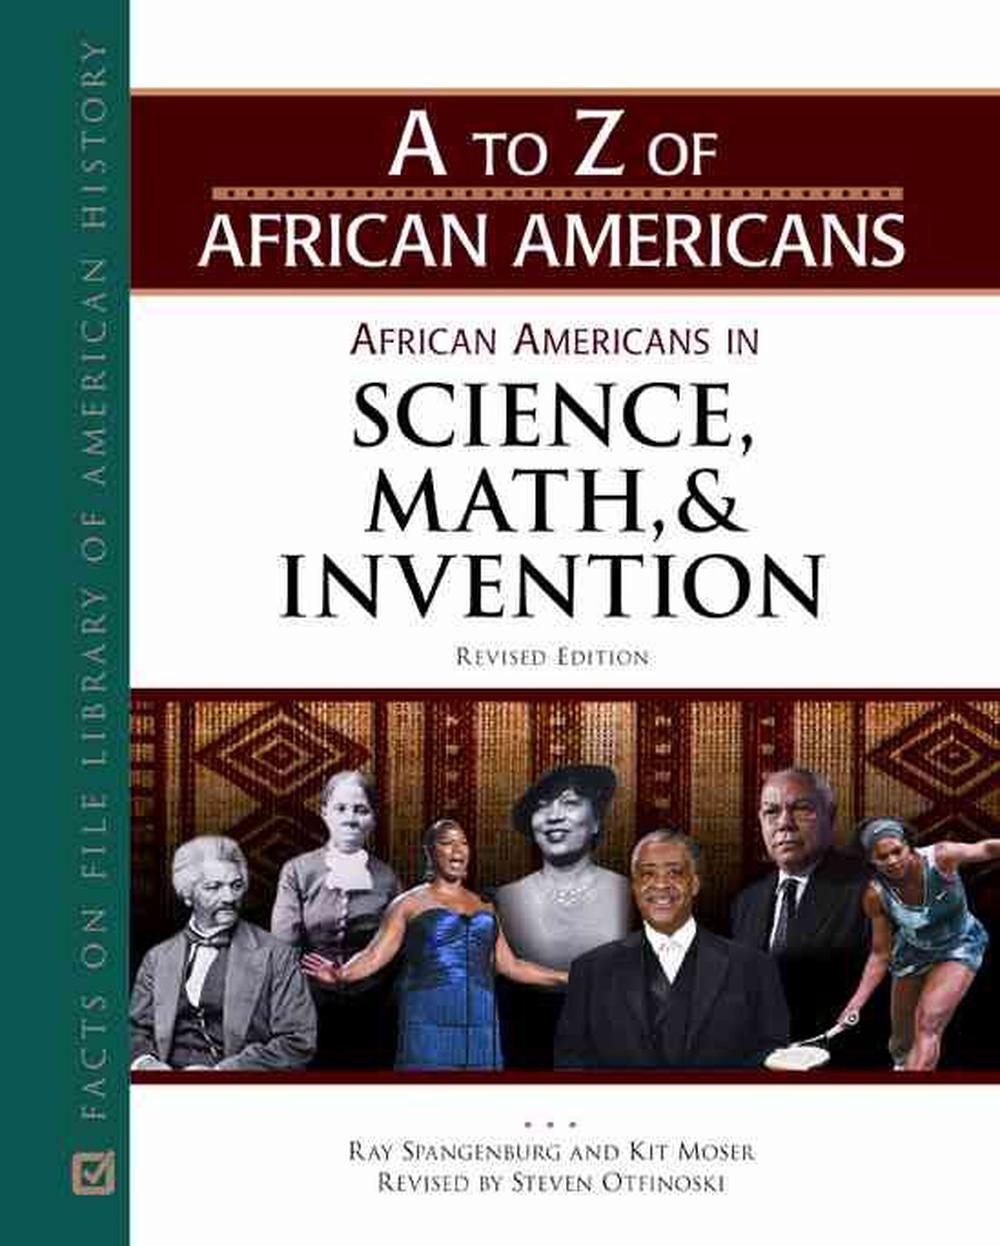 African Americans in Science, Math, and Invention by Ray Spangenburg